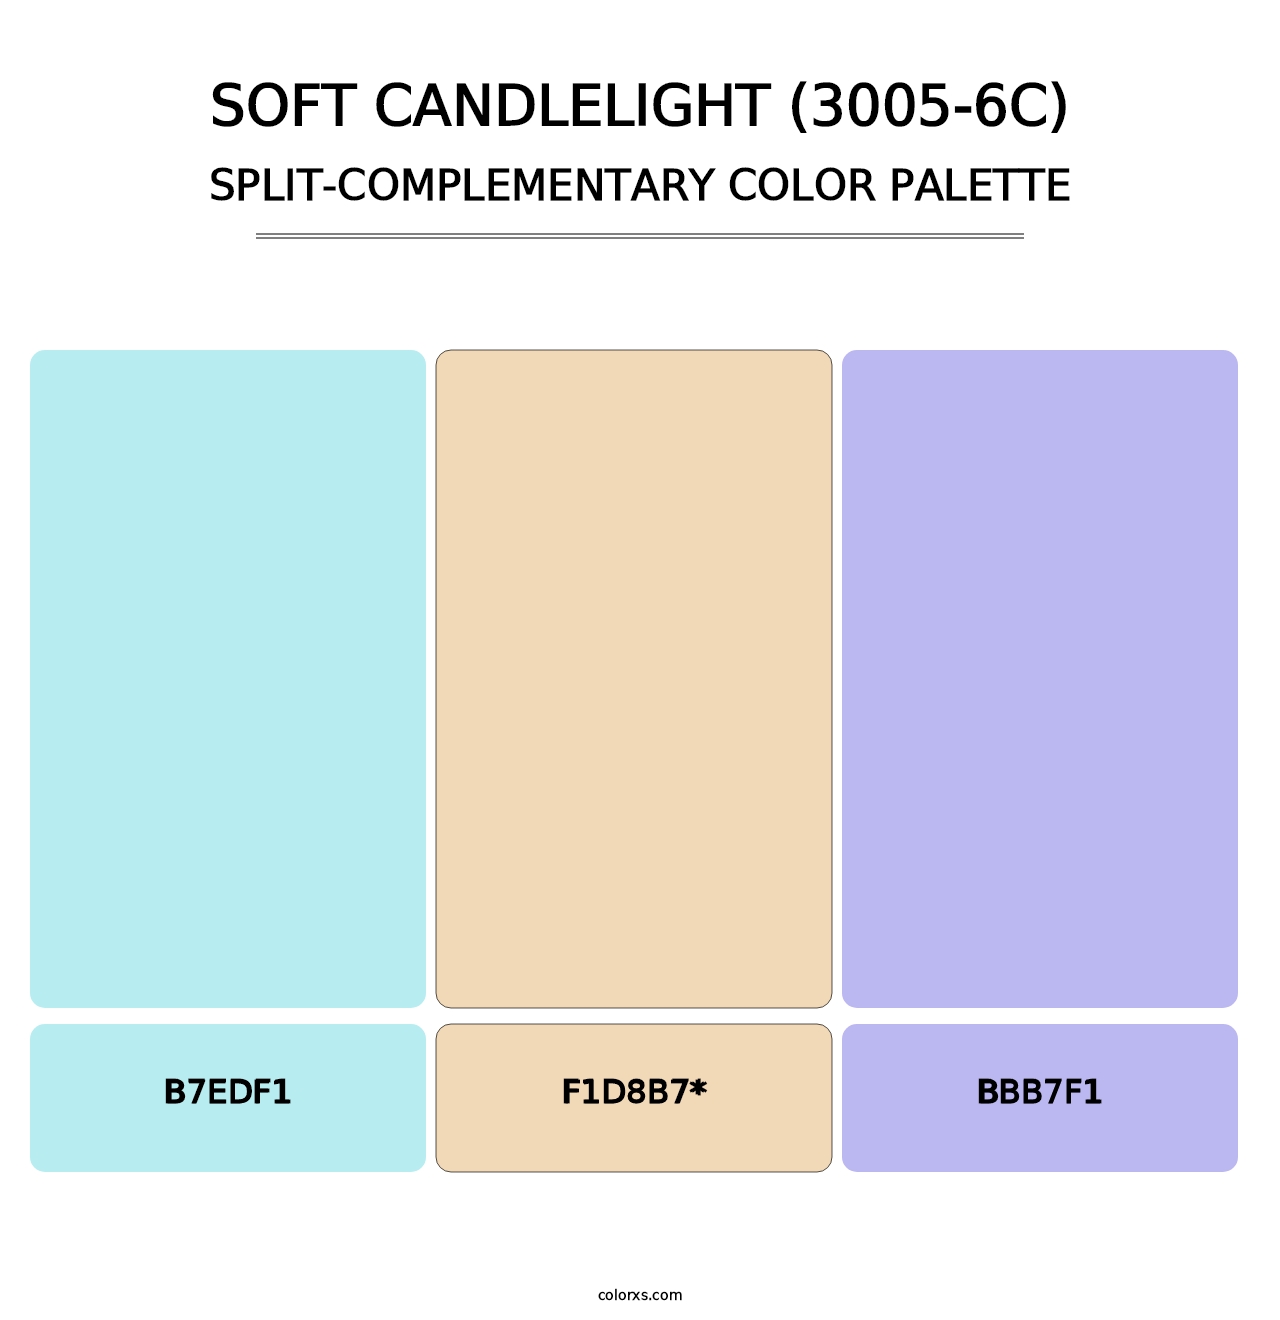 Soft Candlelight (3005-6C) - Split-Complementary Color Palette